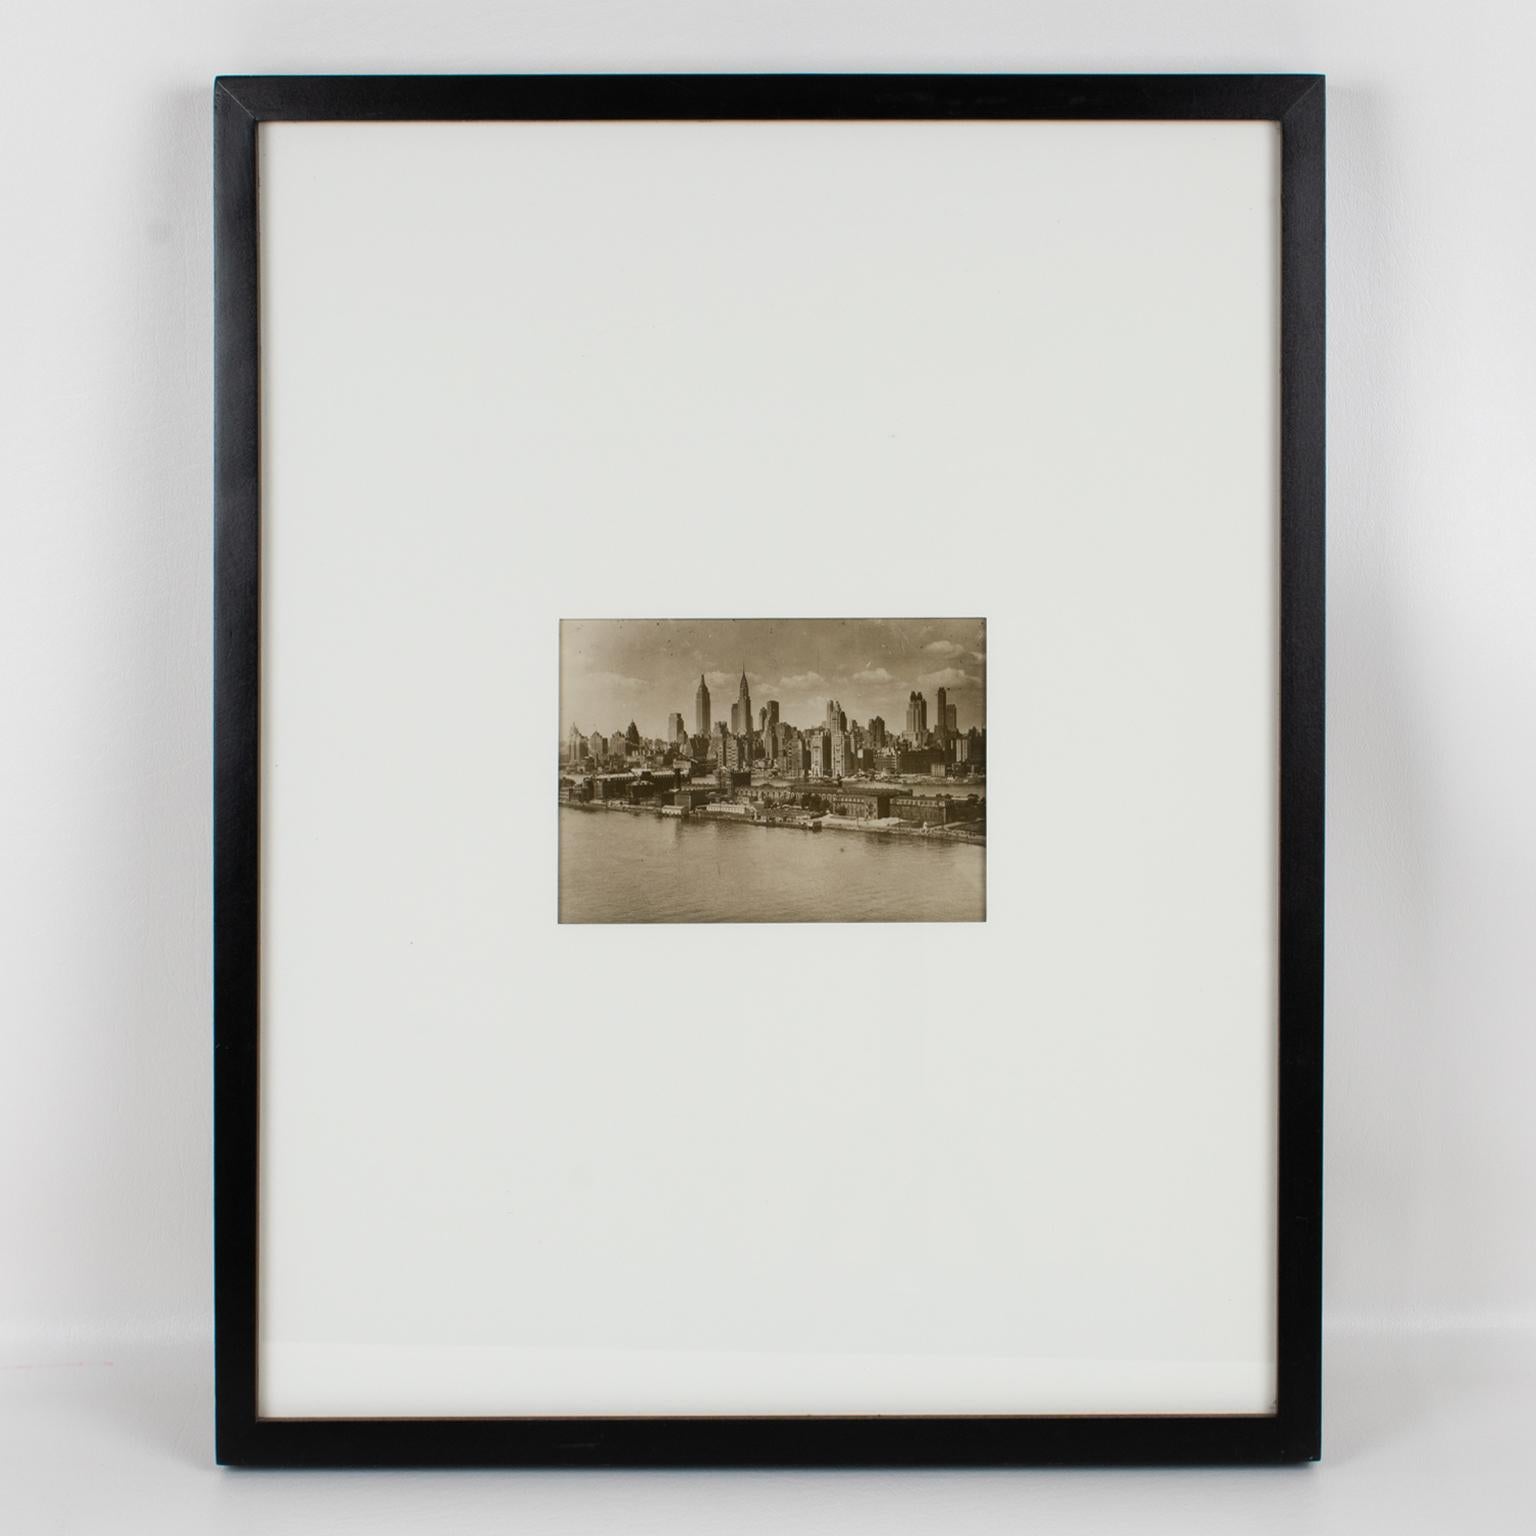 New York City Skyscrapers, July 1931, Silver Gelatin B and W Photography Framed For Sale 3